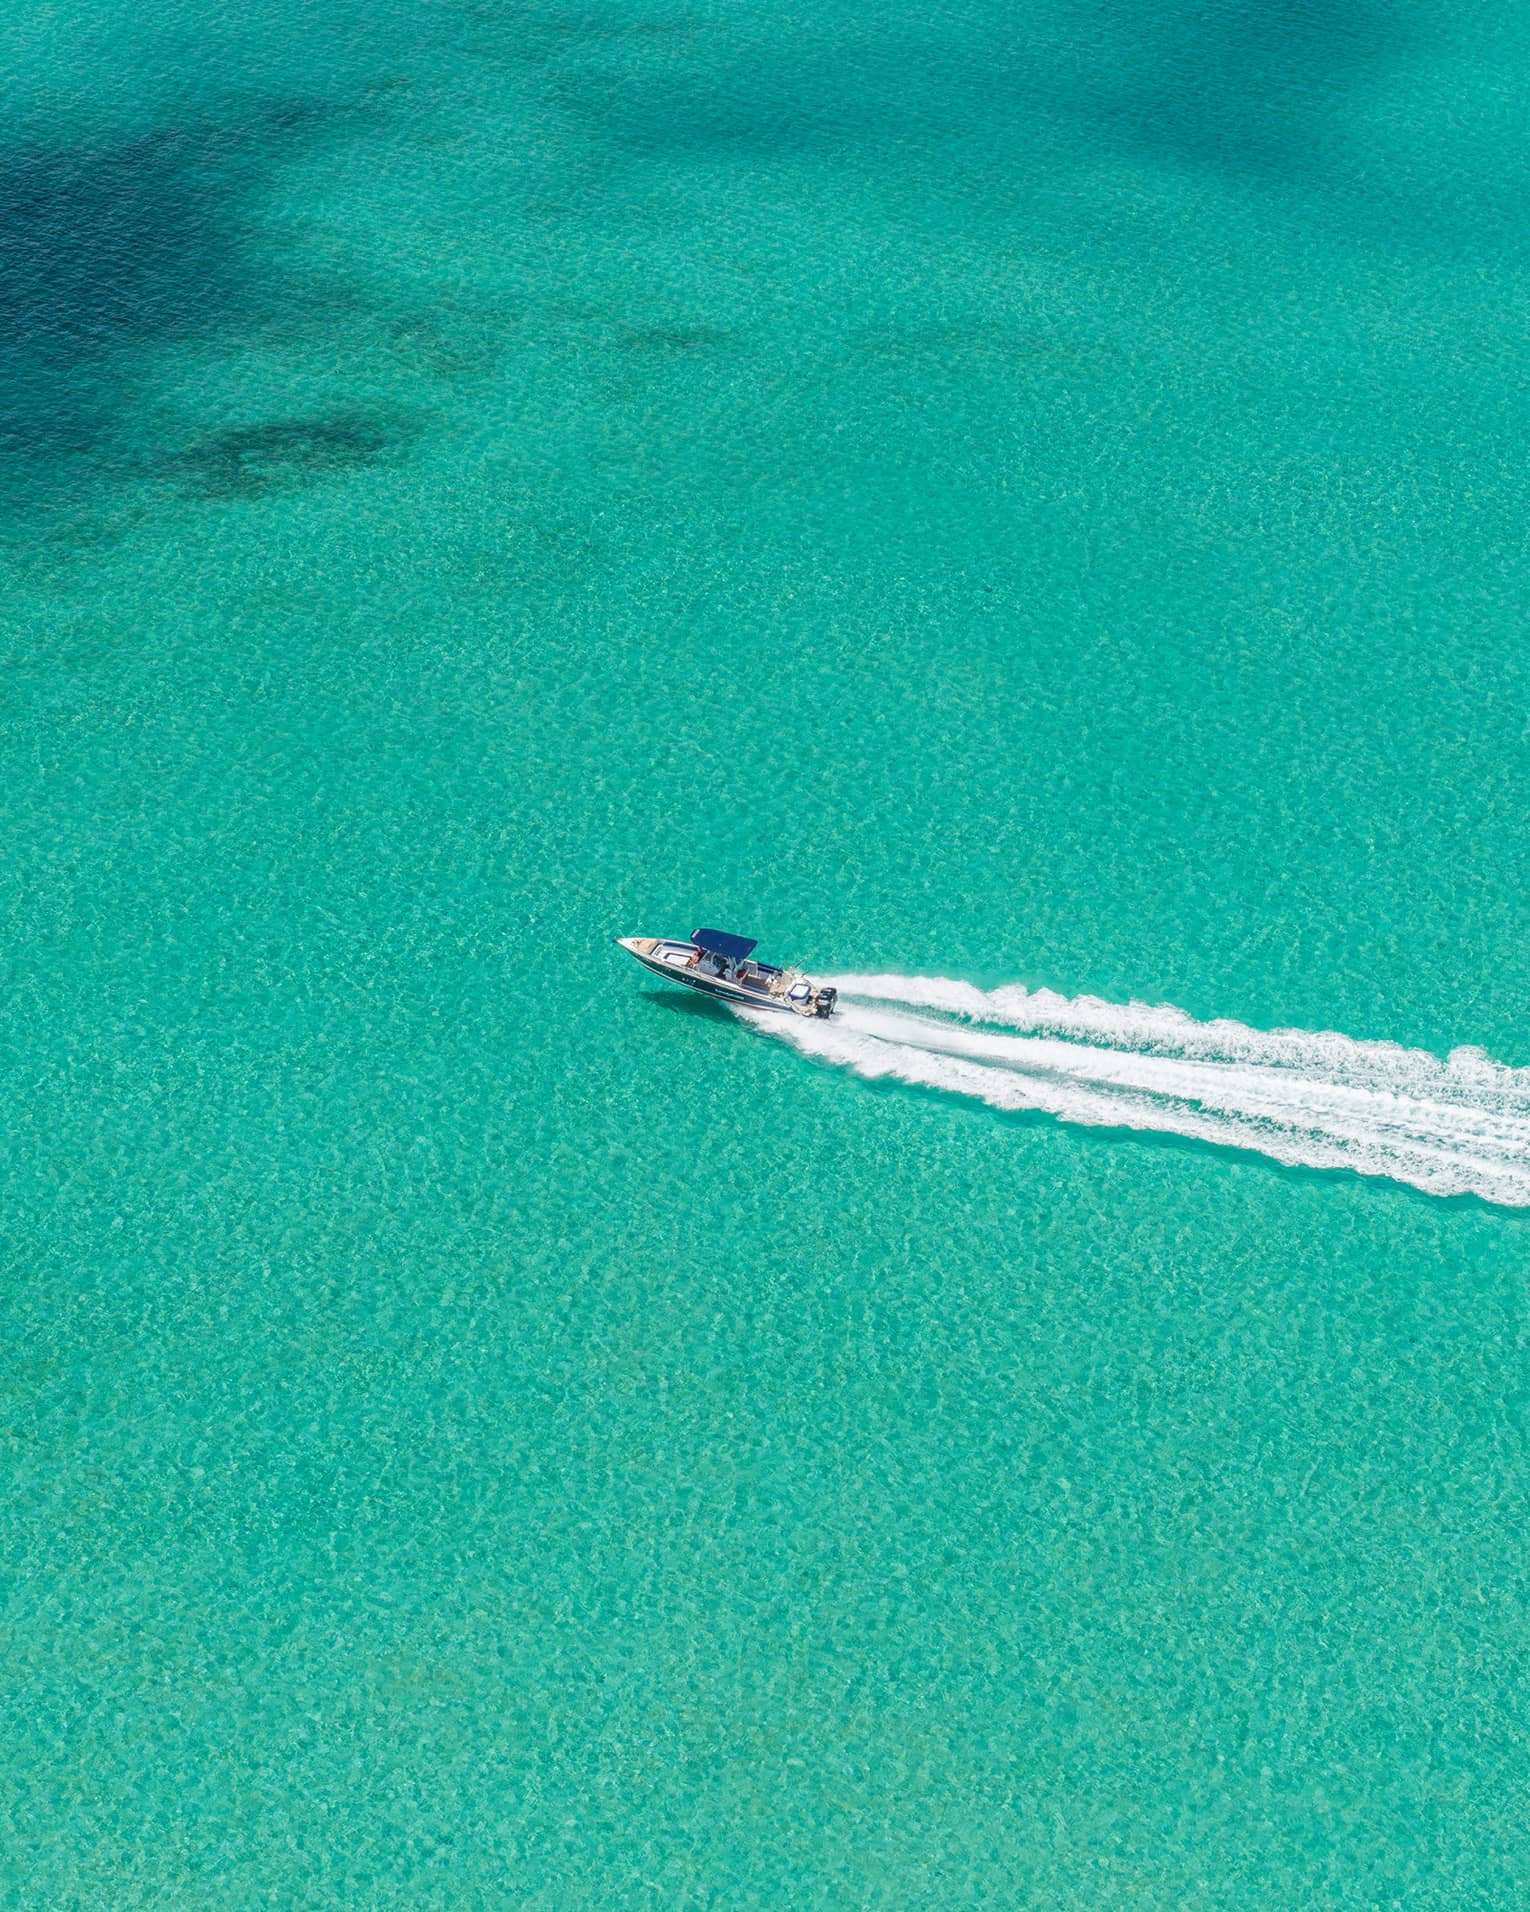 Aerial view of a speedboat moving through a vast expanse of turquoise water, followed by a substantial wake trail.